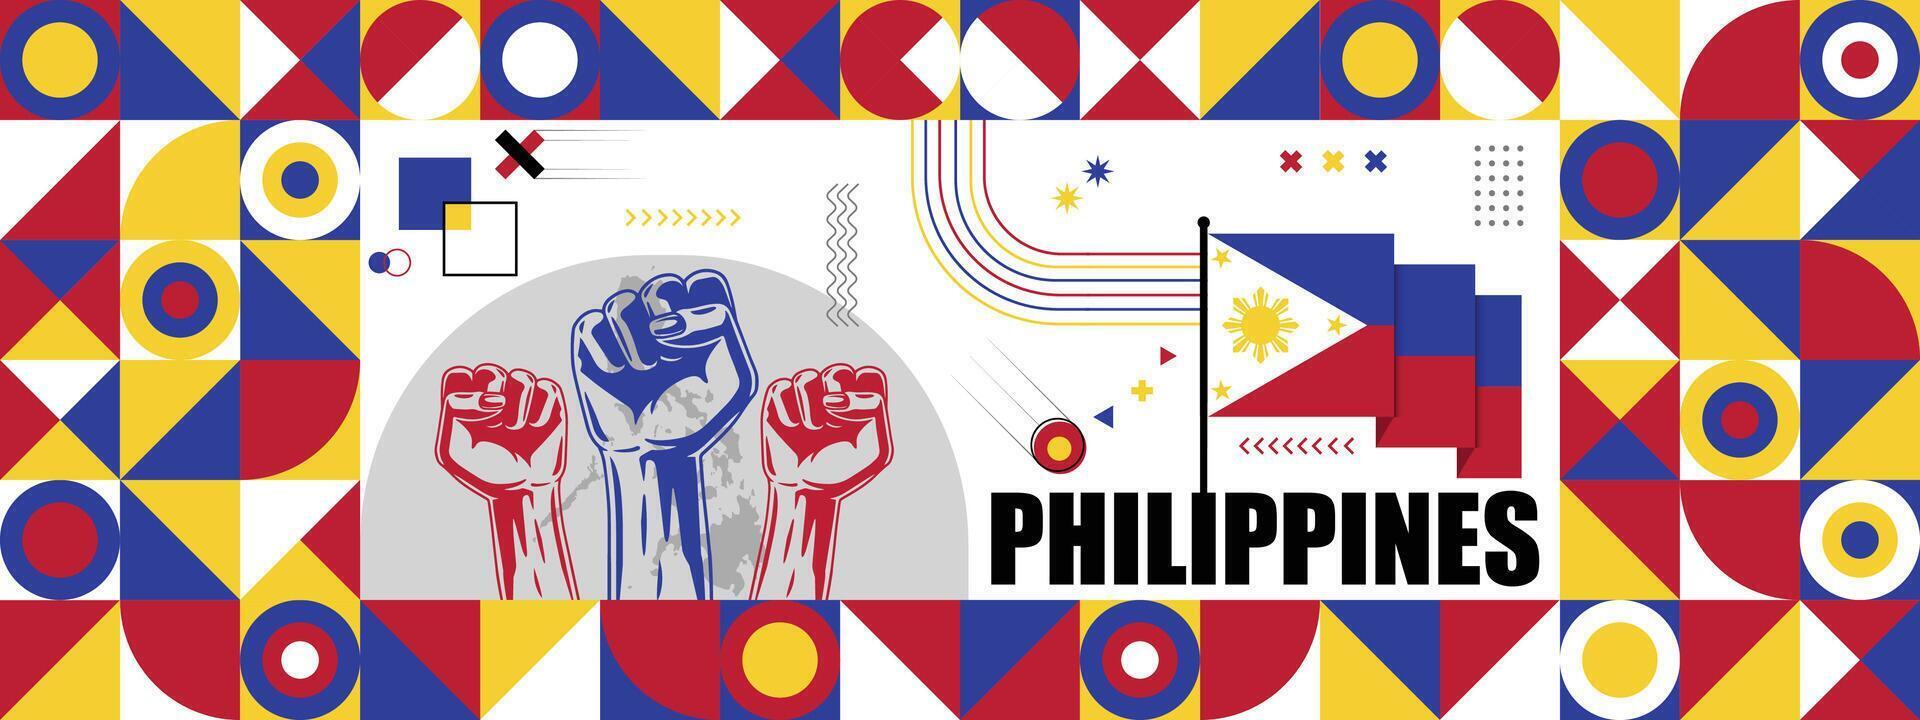 Flag and map of Philippines with raised fists. National day or Independence day design for Counrty celebration. Modern retro design with abstract icons. vector